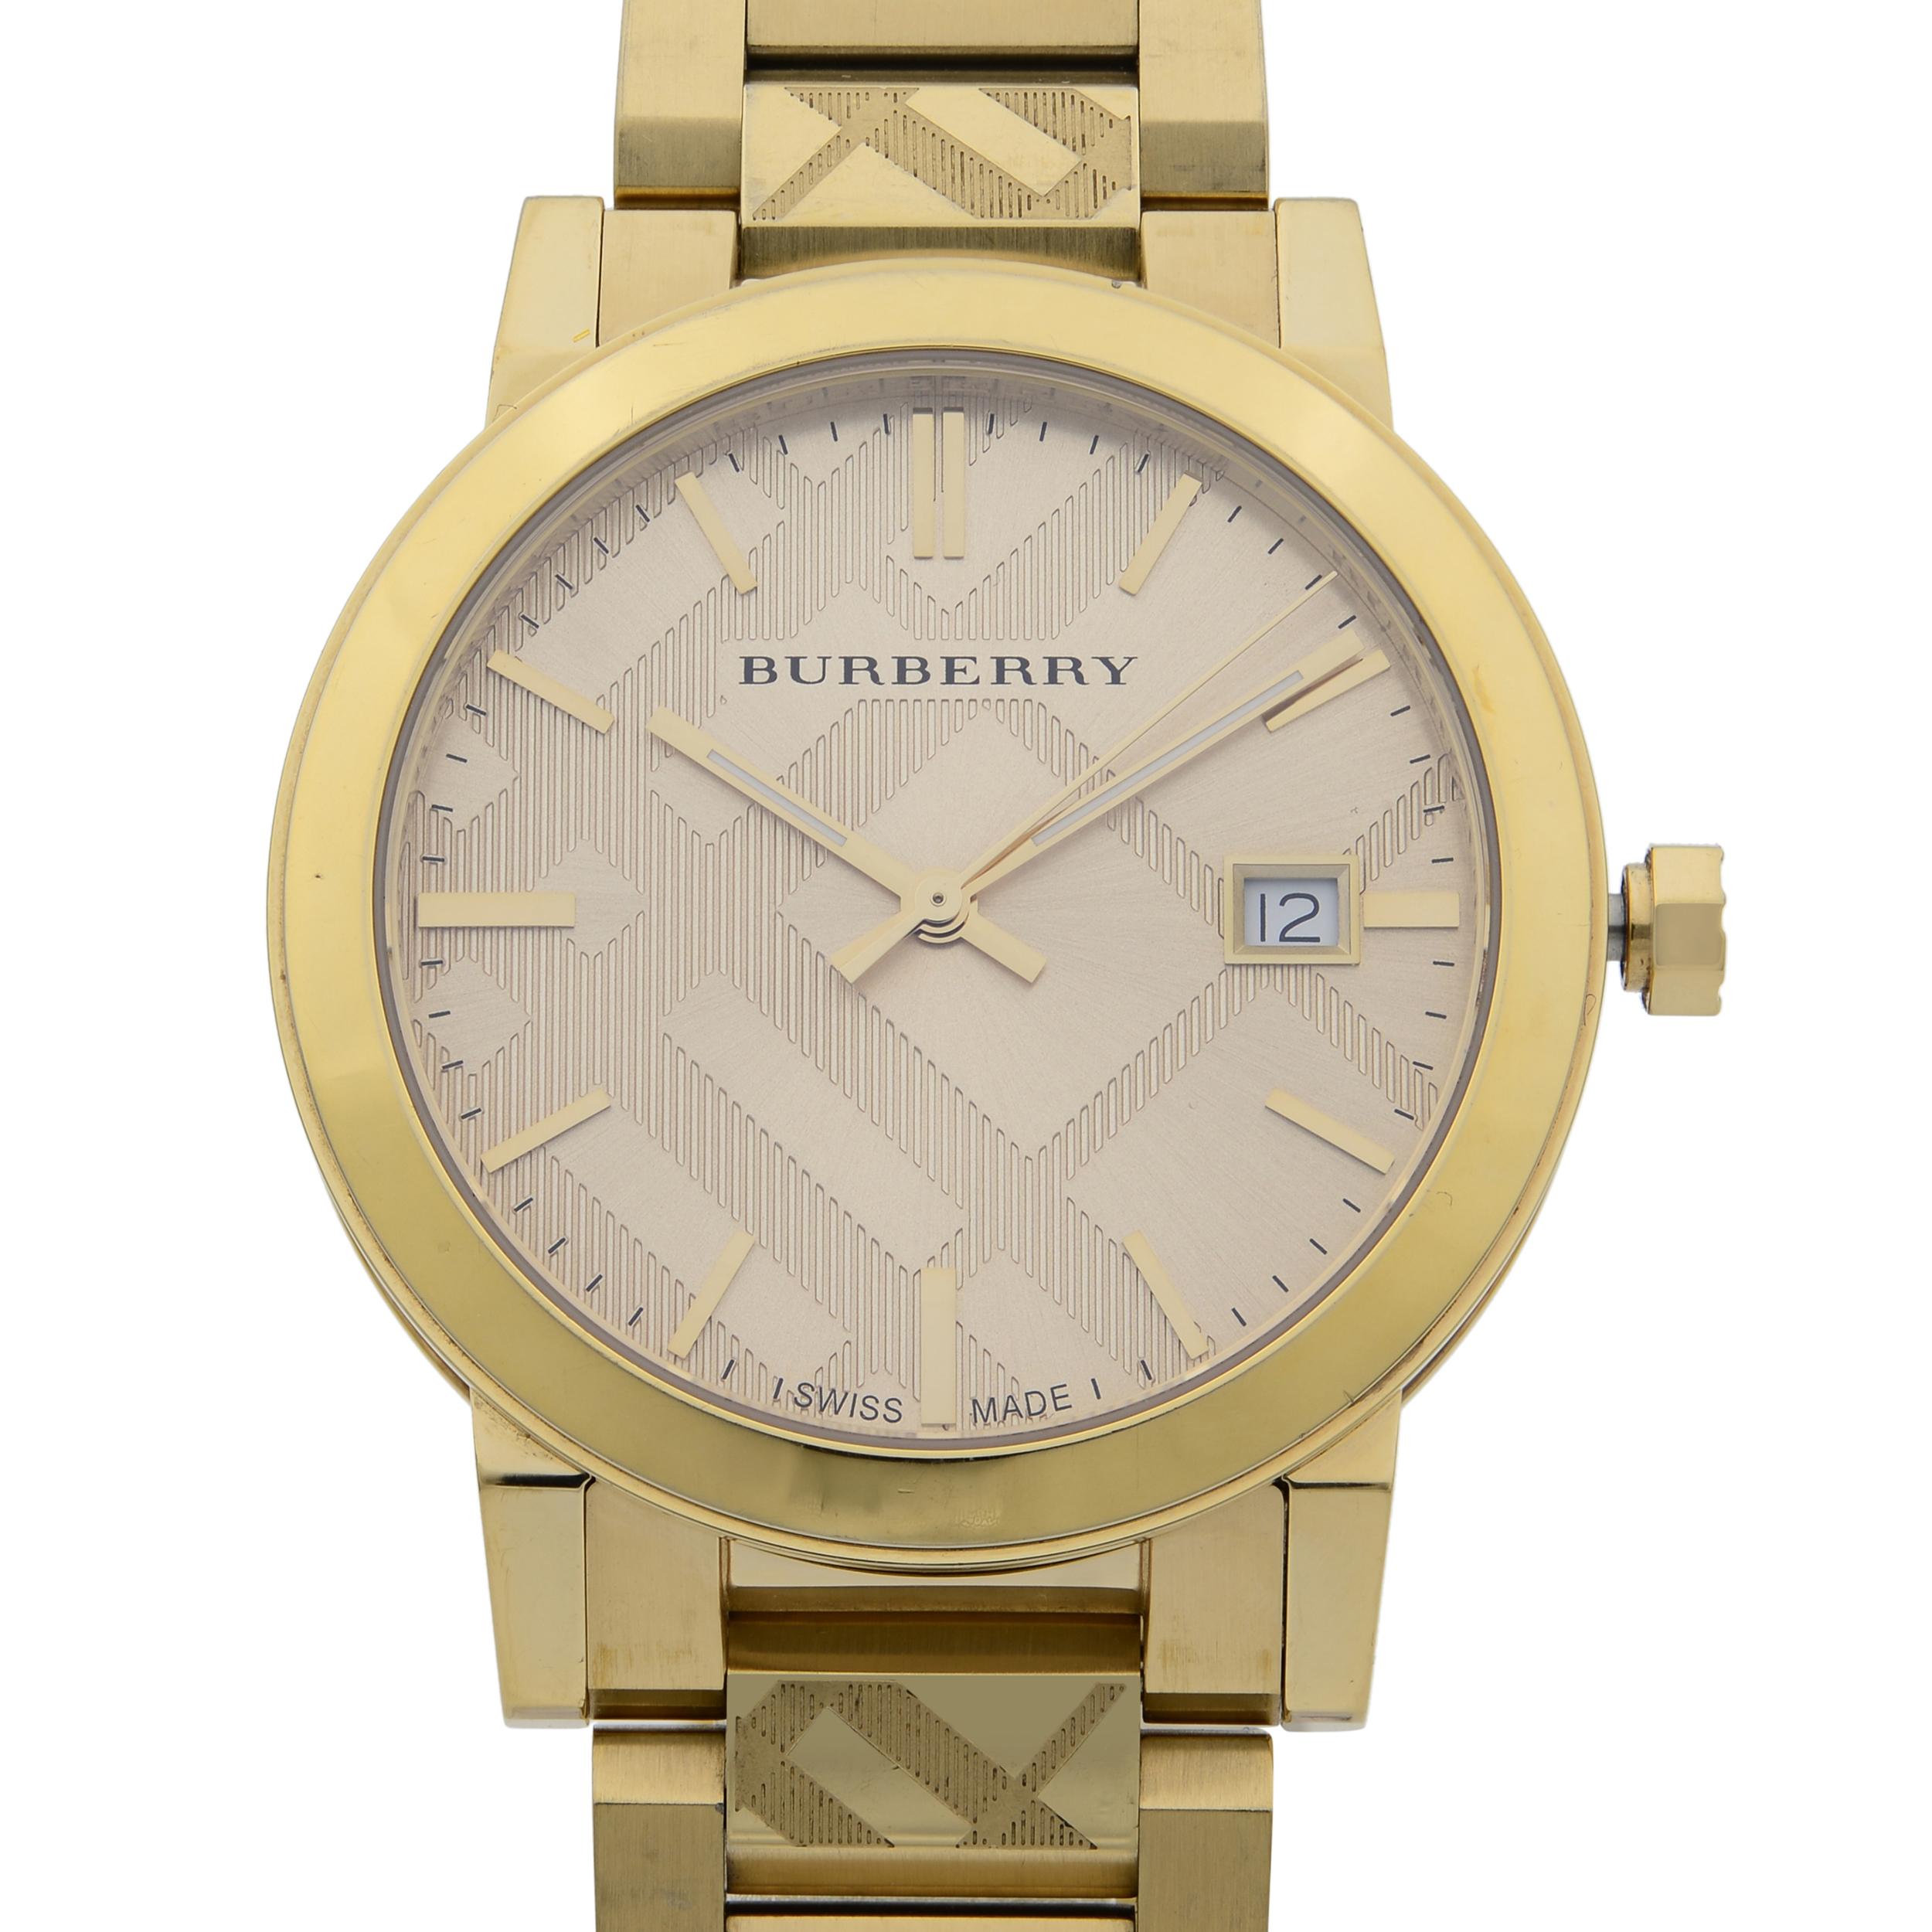 This pre-owned Burberry  BU9038 is a beautiful Unisex timepiece that is powered by quartz (battery) movement which is cased in a stainless steel case. It has a round shape face, date indicator dial and has hand sticks style markers. The case size is